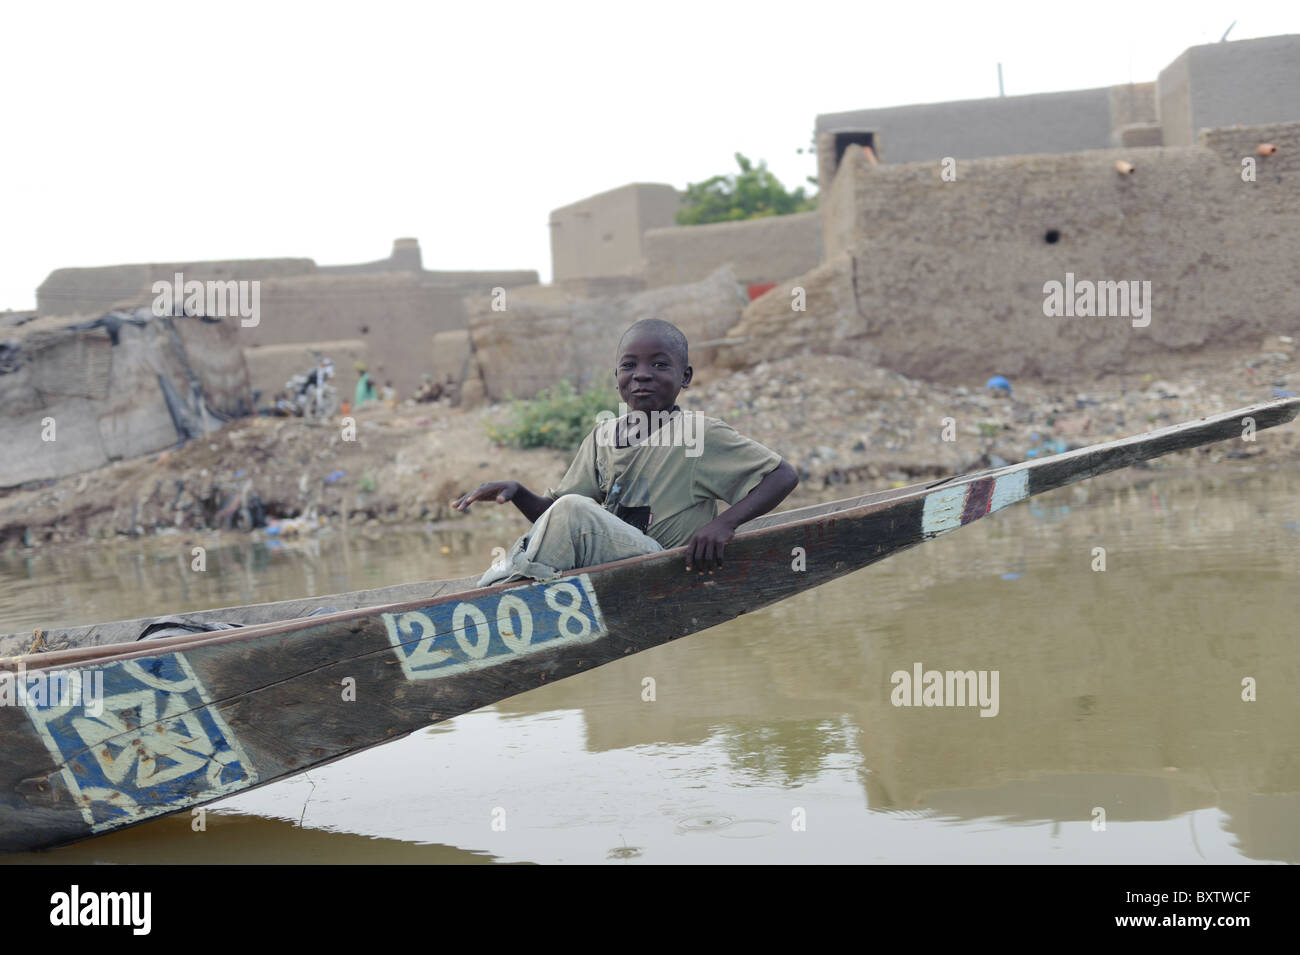 Young boy sitting on the bow of a pirogue. Djenné, Mali Stock Photo